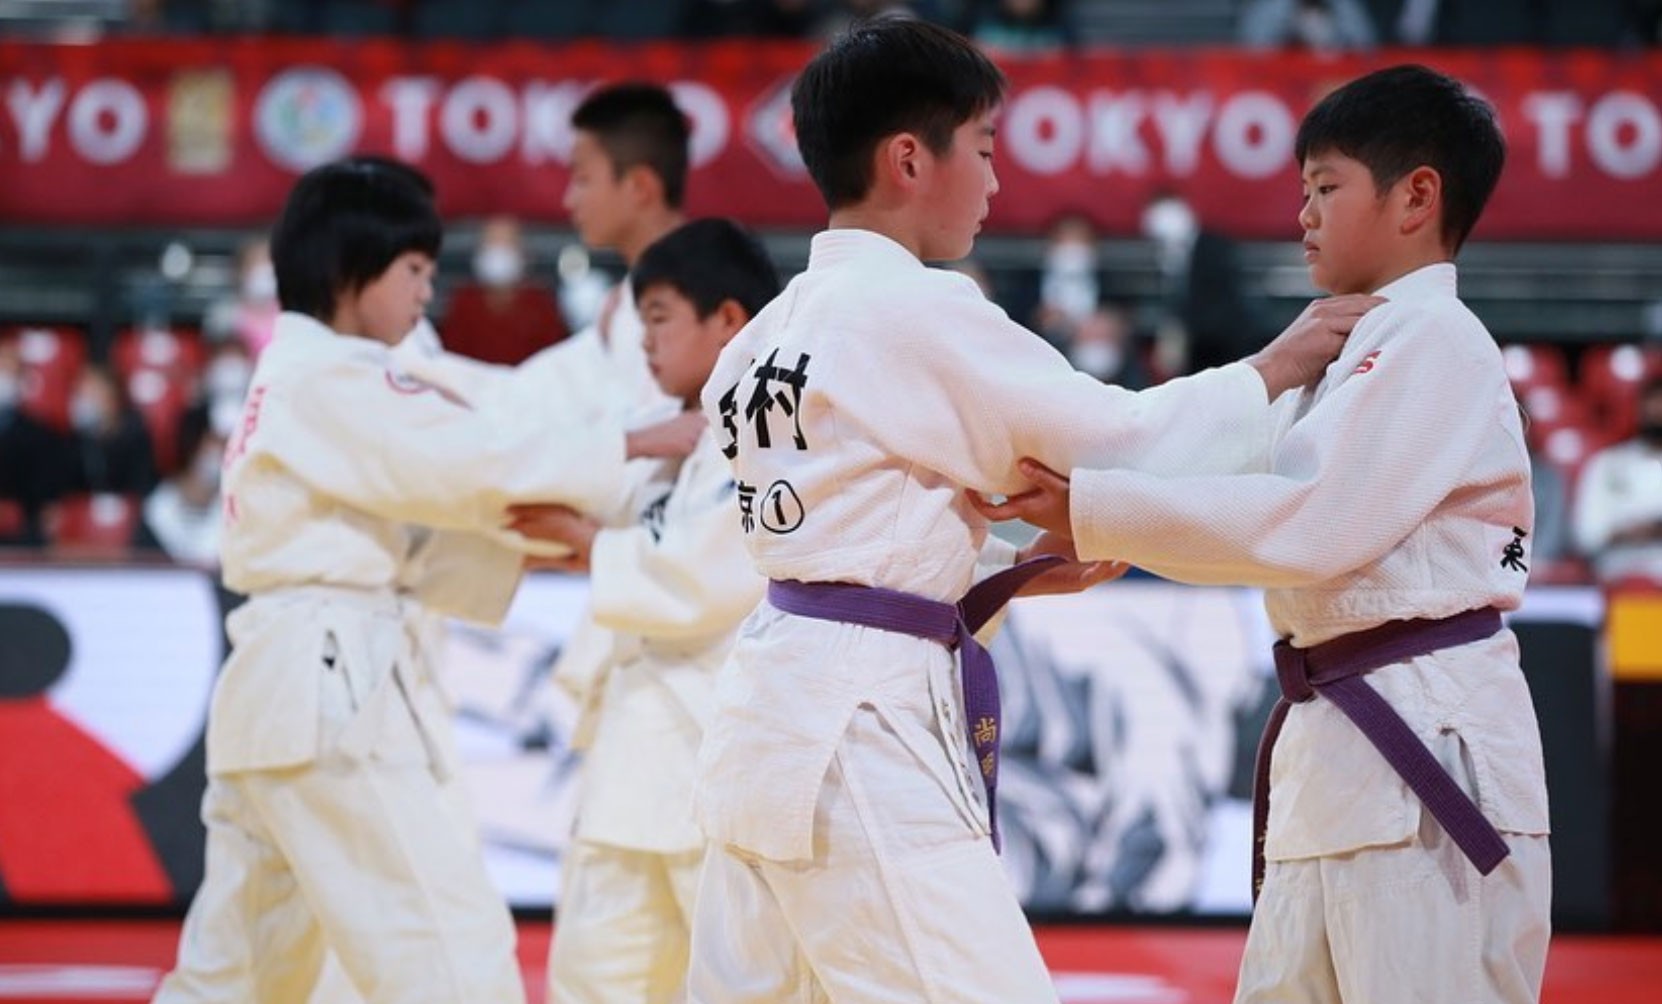 Why Judo Is Good For Your Children